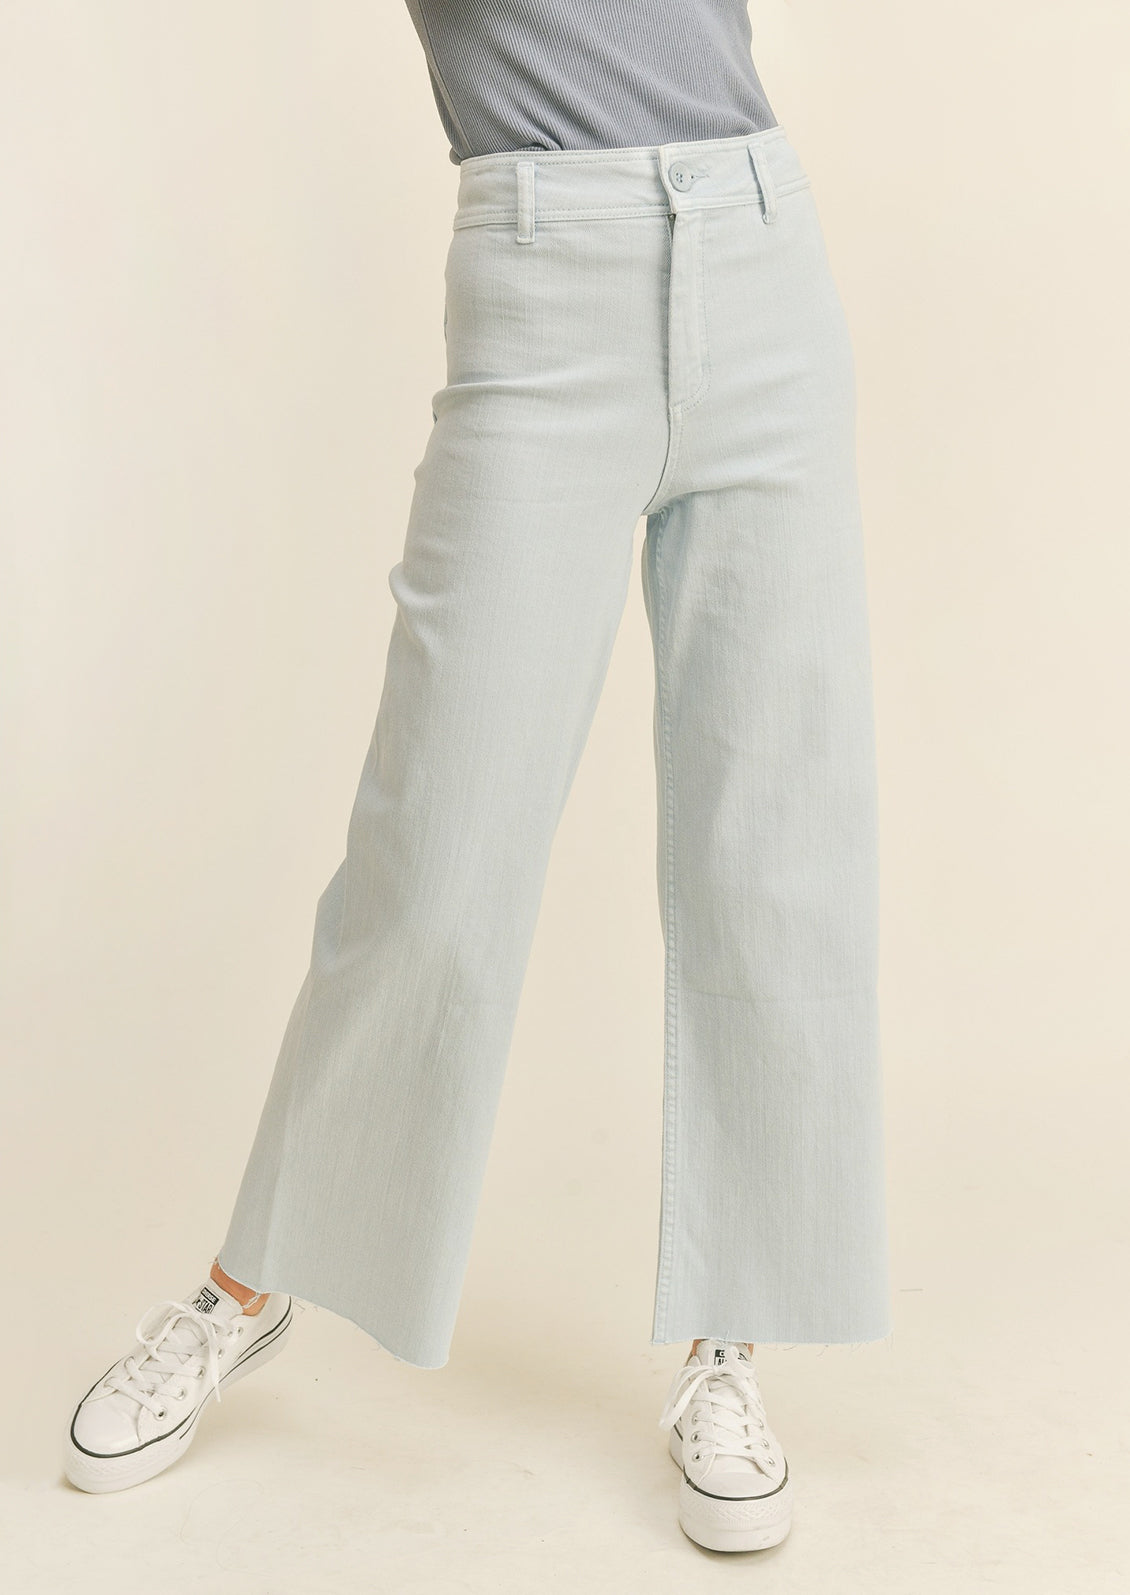 A pair of light powder blue colored wide leg pants with belt loops.